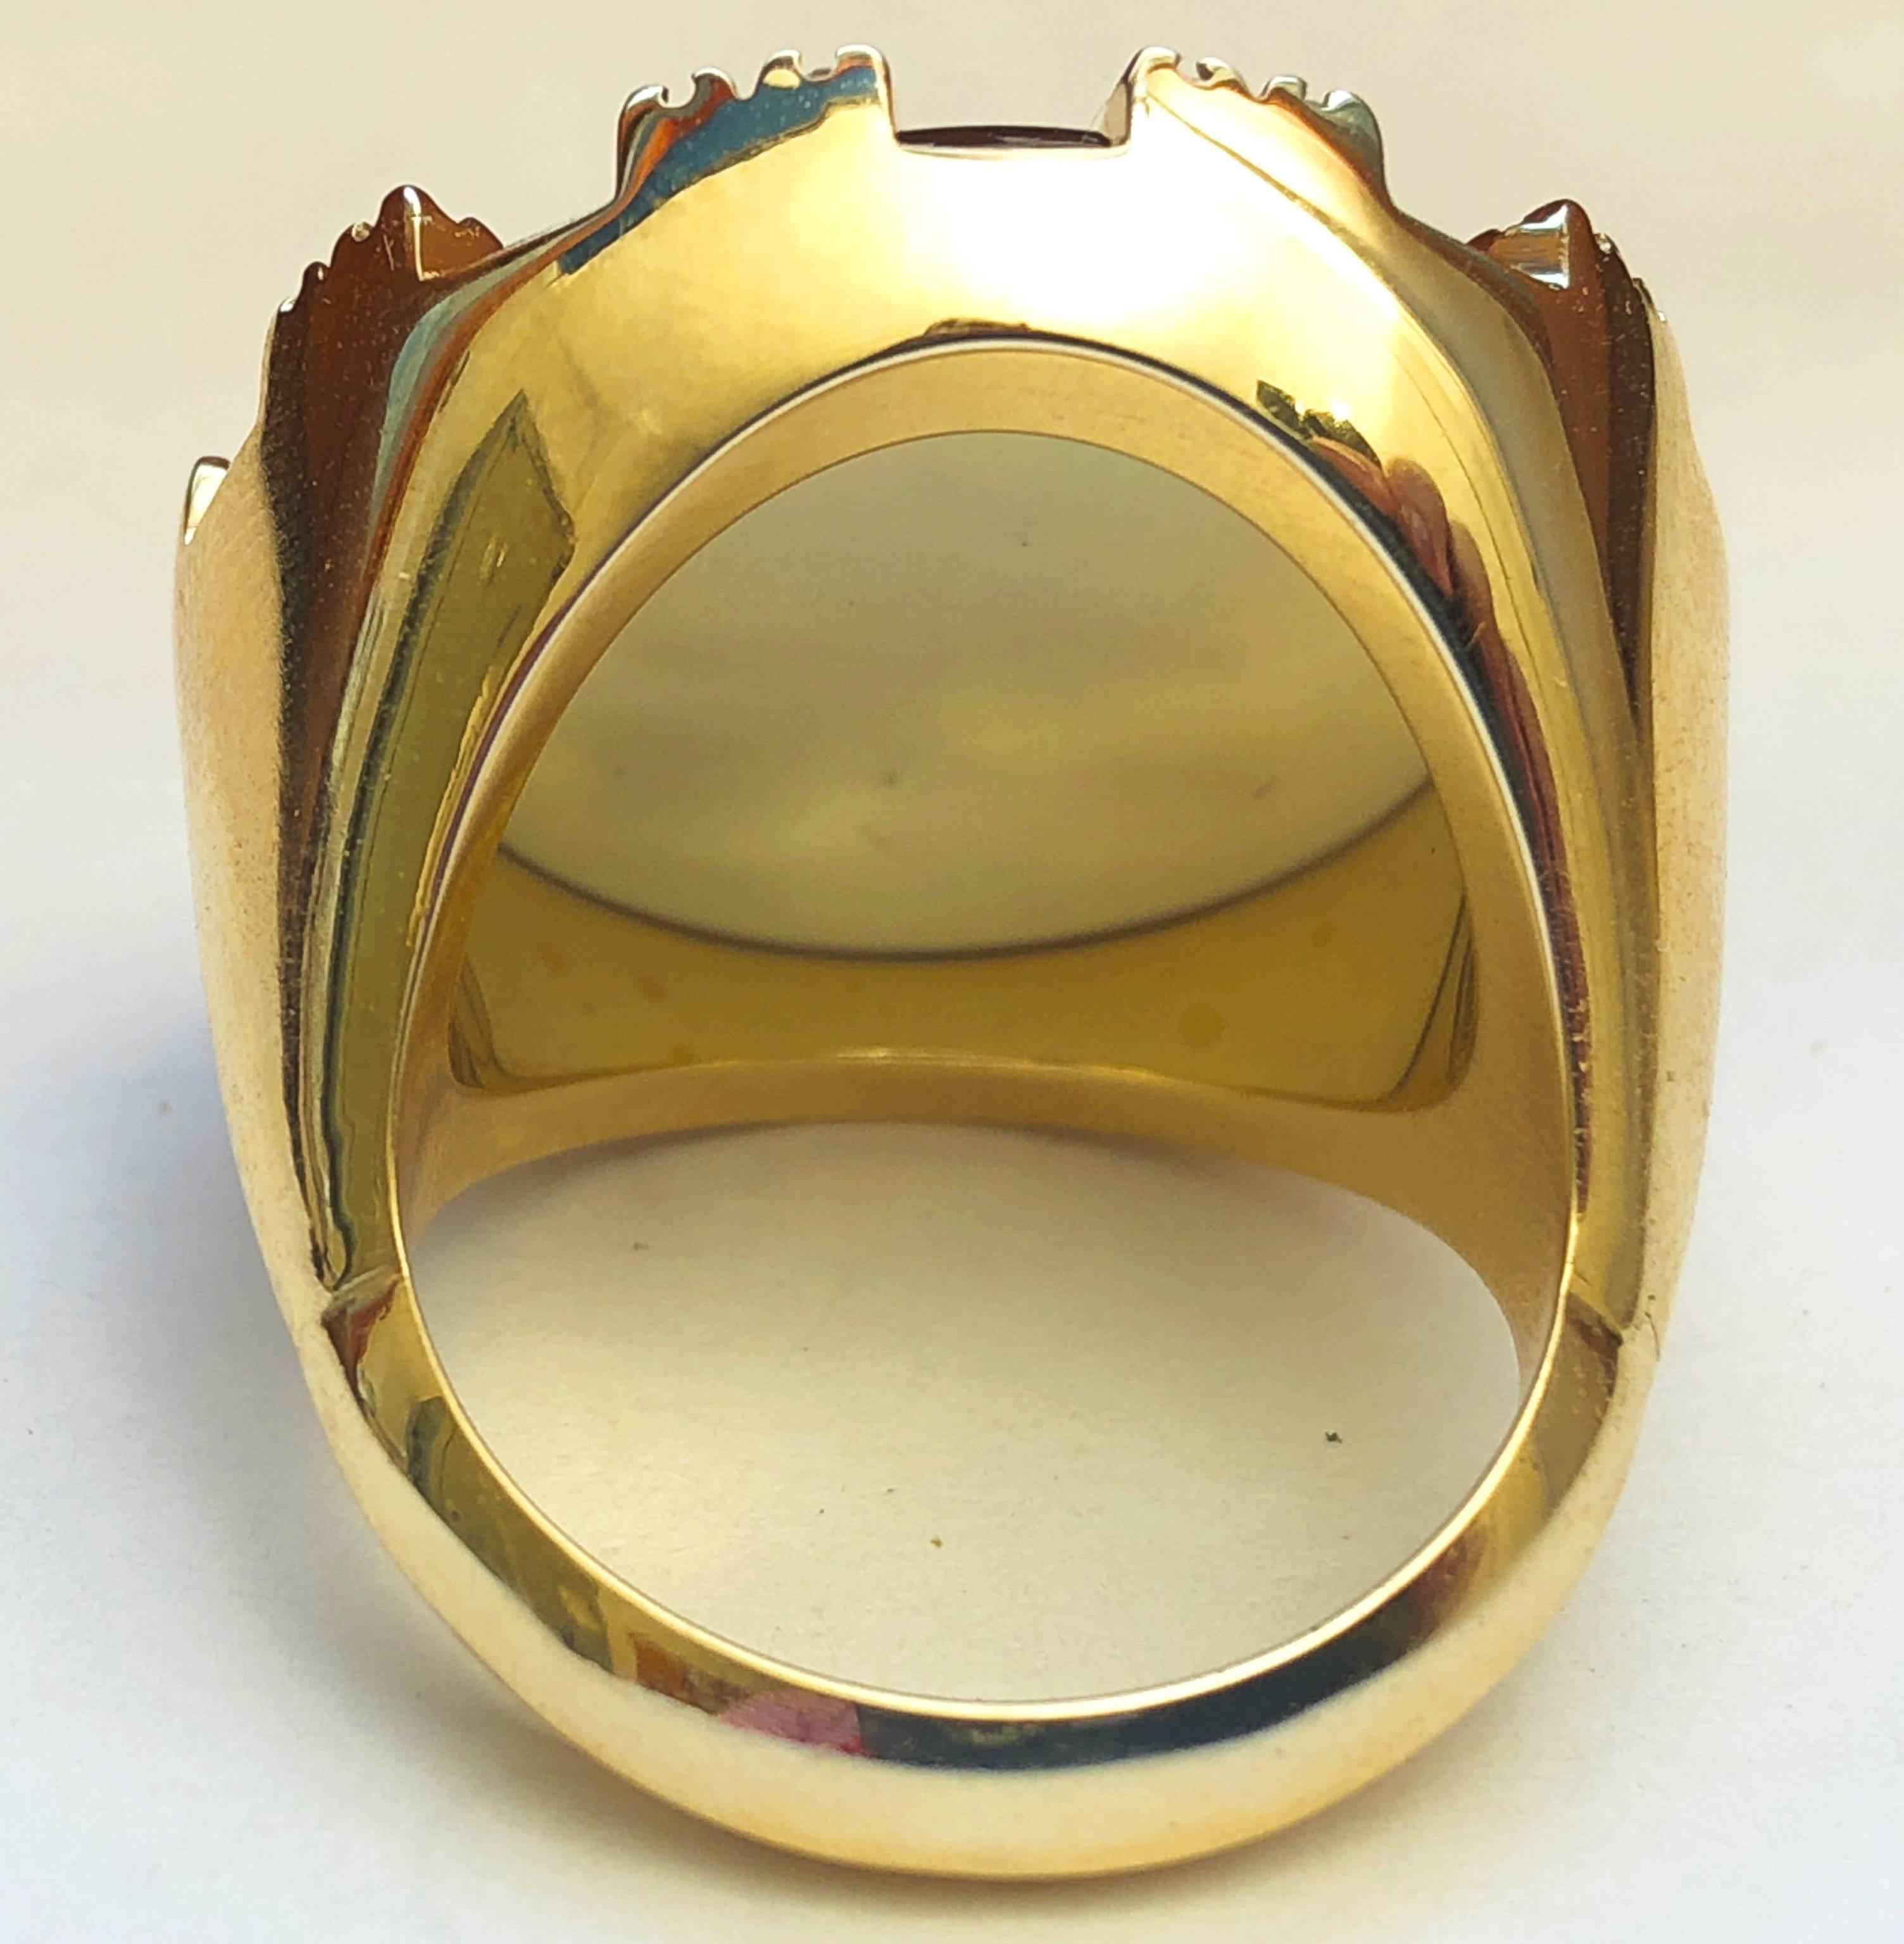 Berca Terrier Motif Reverse Crystal Diamond Yellow Gold One-of-a-Kind 1950s Ring For Sale 5